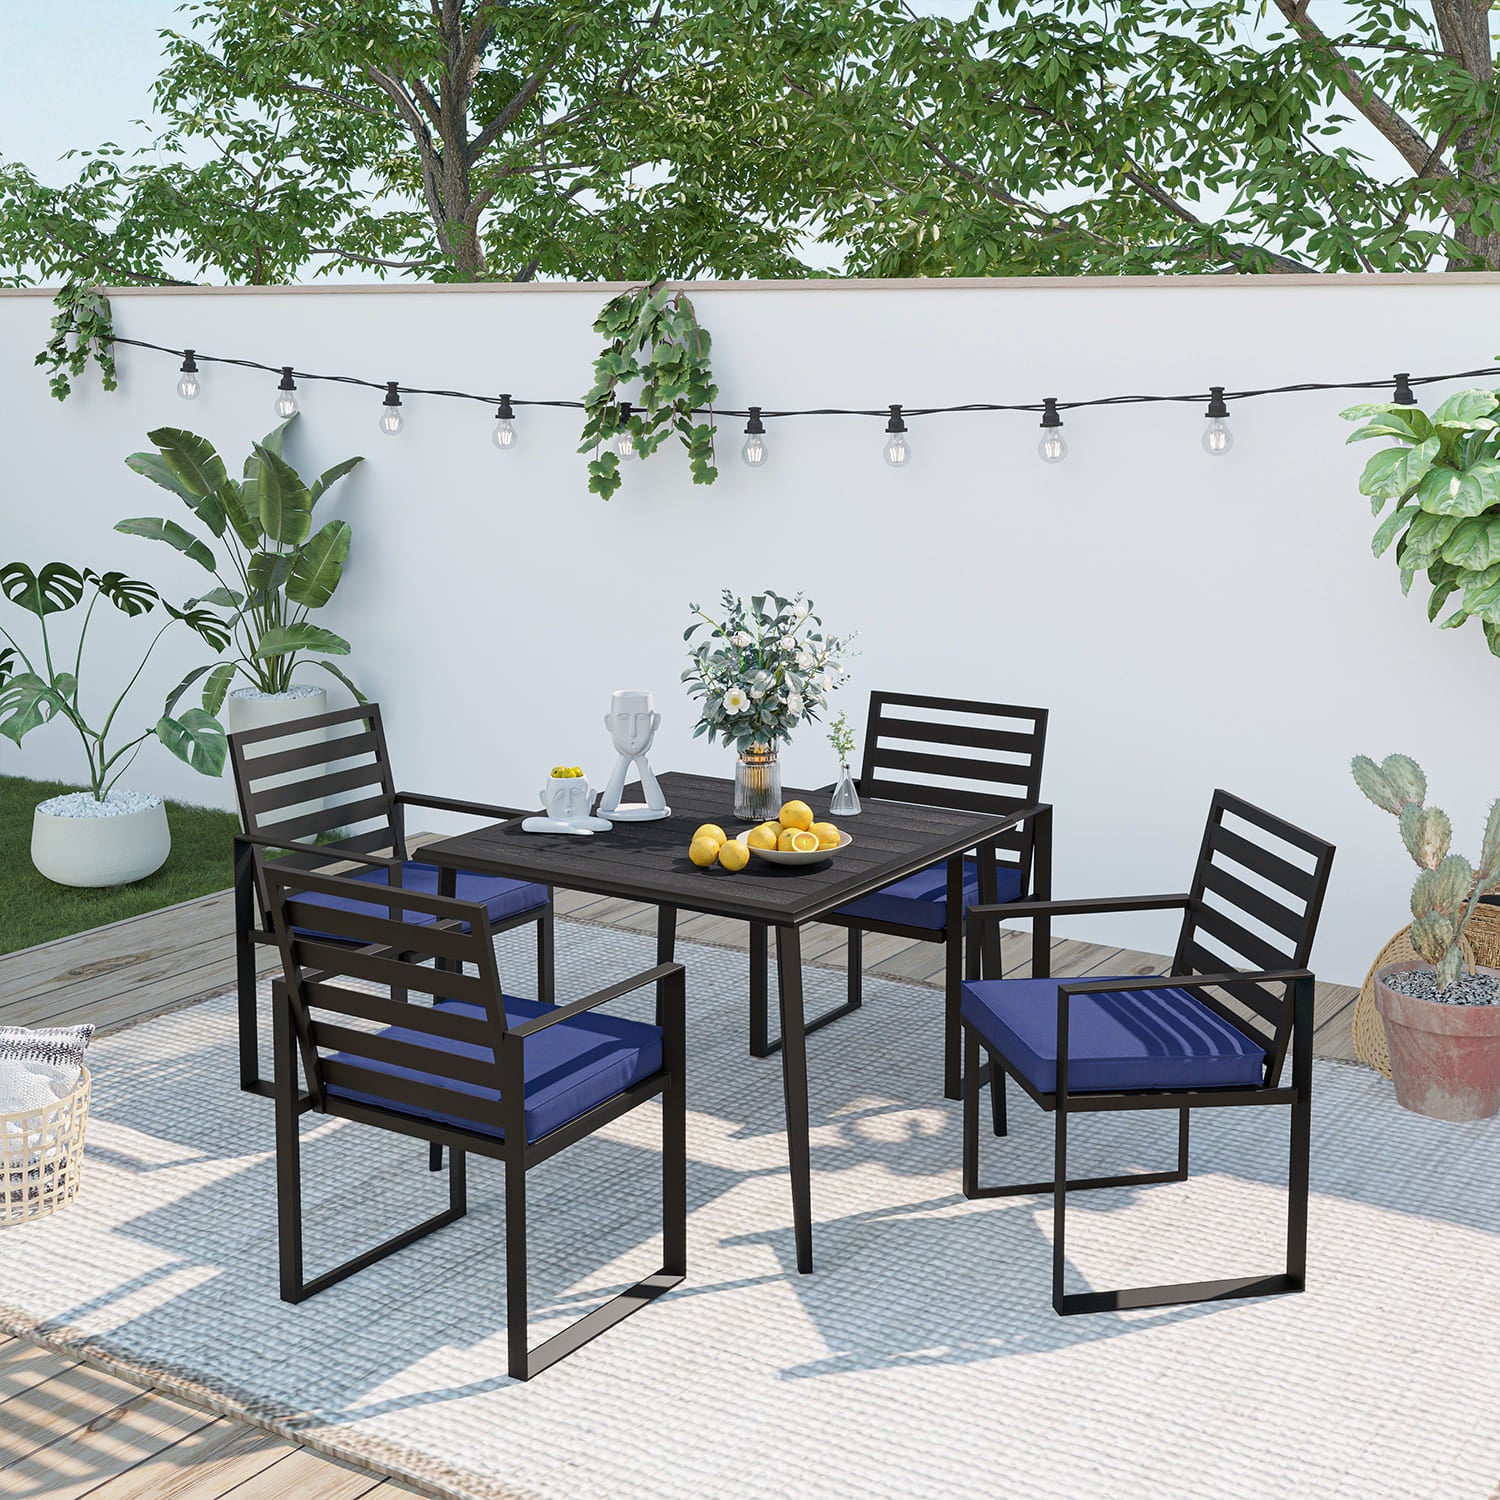 patio dining chairoutdoor dining chair, patio metal chairs. outdoor dining outdoor dinner